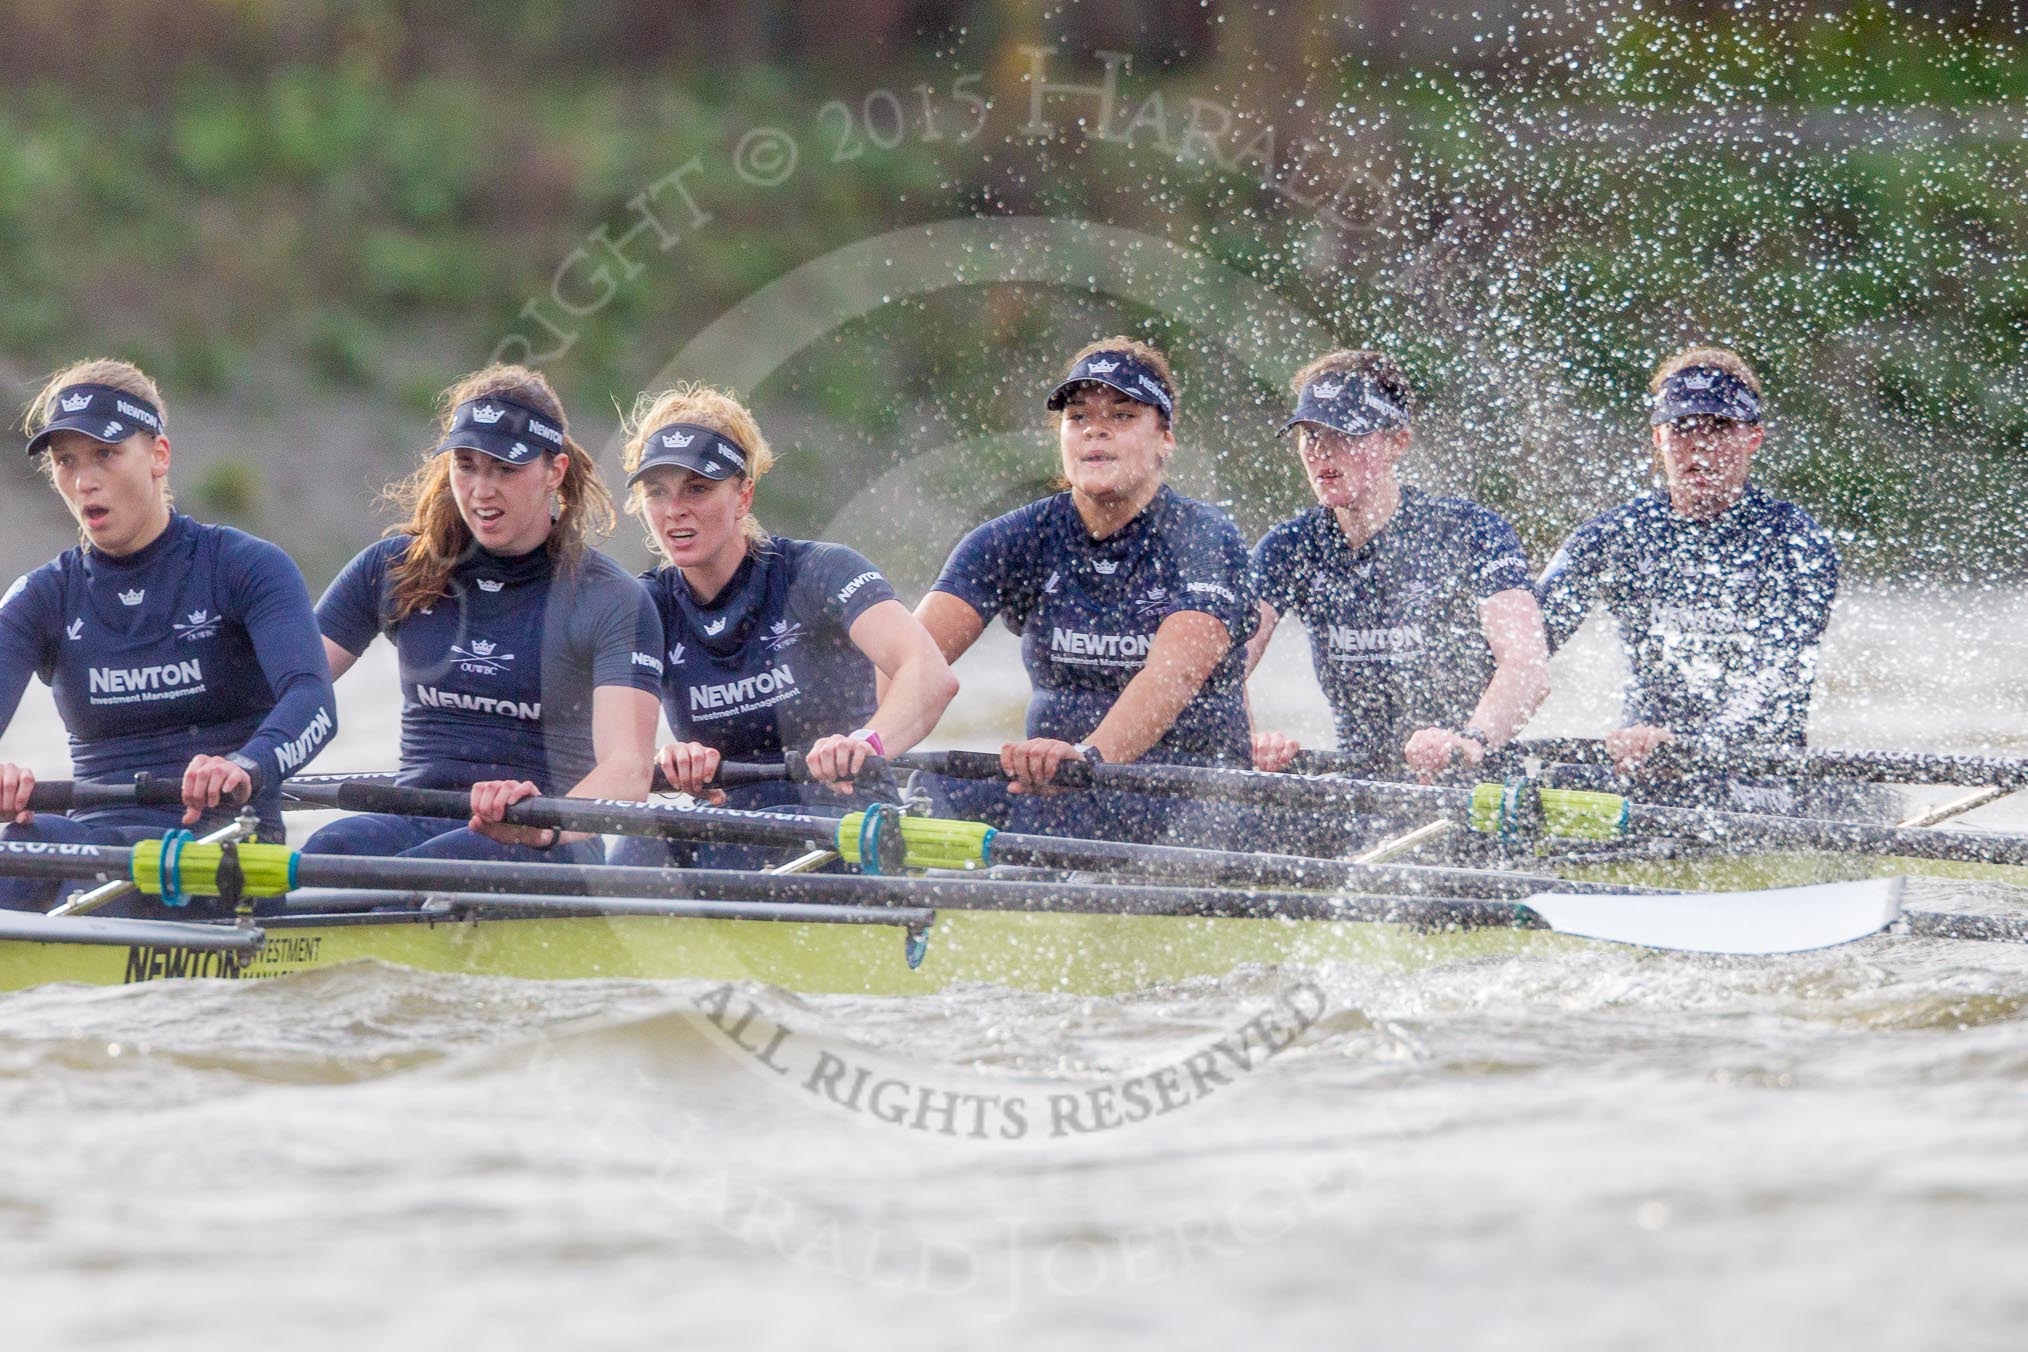 The Boat Race season 2016 - Women's Boat Race Trial Eights (OUWBC, Oxford): "Charybdis", here 6-Elo Luik, 5-Ruth Siddorn, 4-Emma Spruce, 3-Lara Pysden, 2-Christina Fleischer, bow-Georgie Daniell.
River Thames between Putney Bridge and Mortlake,
London SW15,

United Kingdom,
on 10 December 2015 at 12:35, image #296